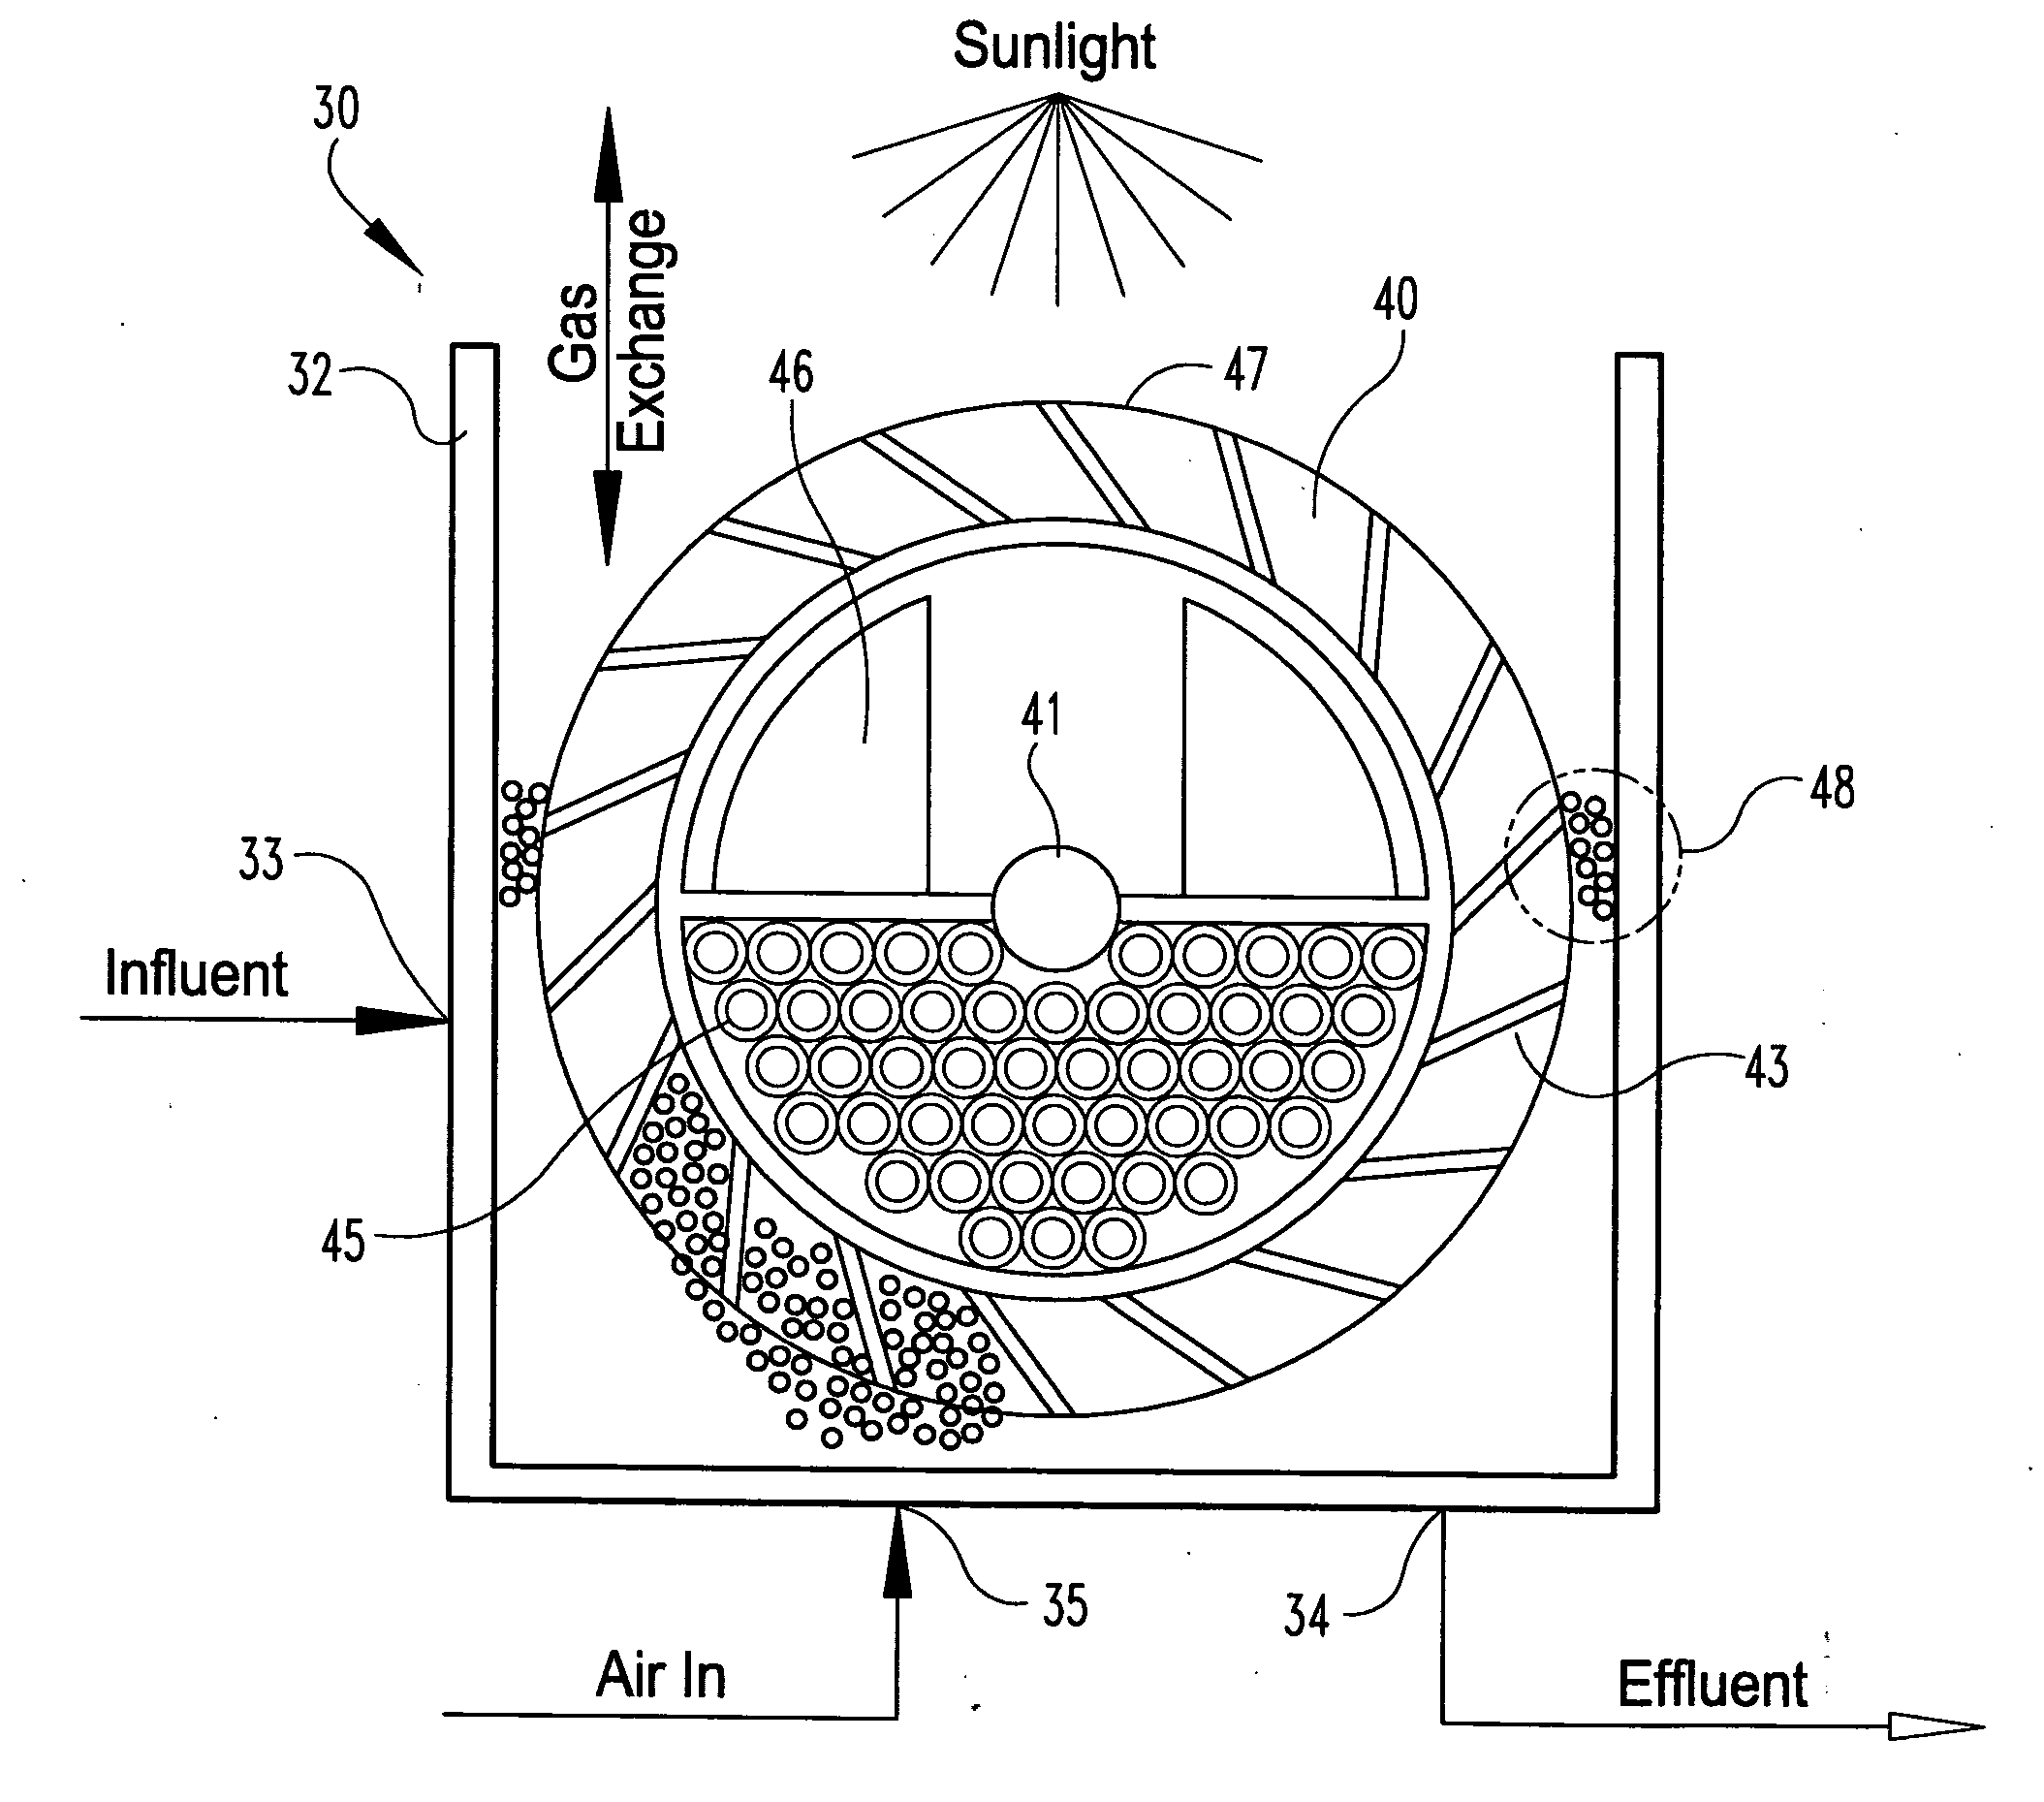 System and Method for Biological Wastewater Treatment and for Using the Byproduct Thereof